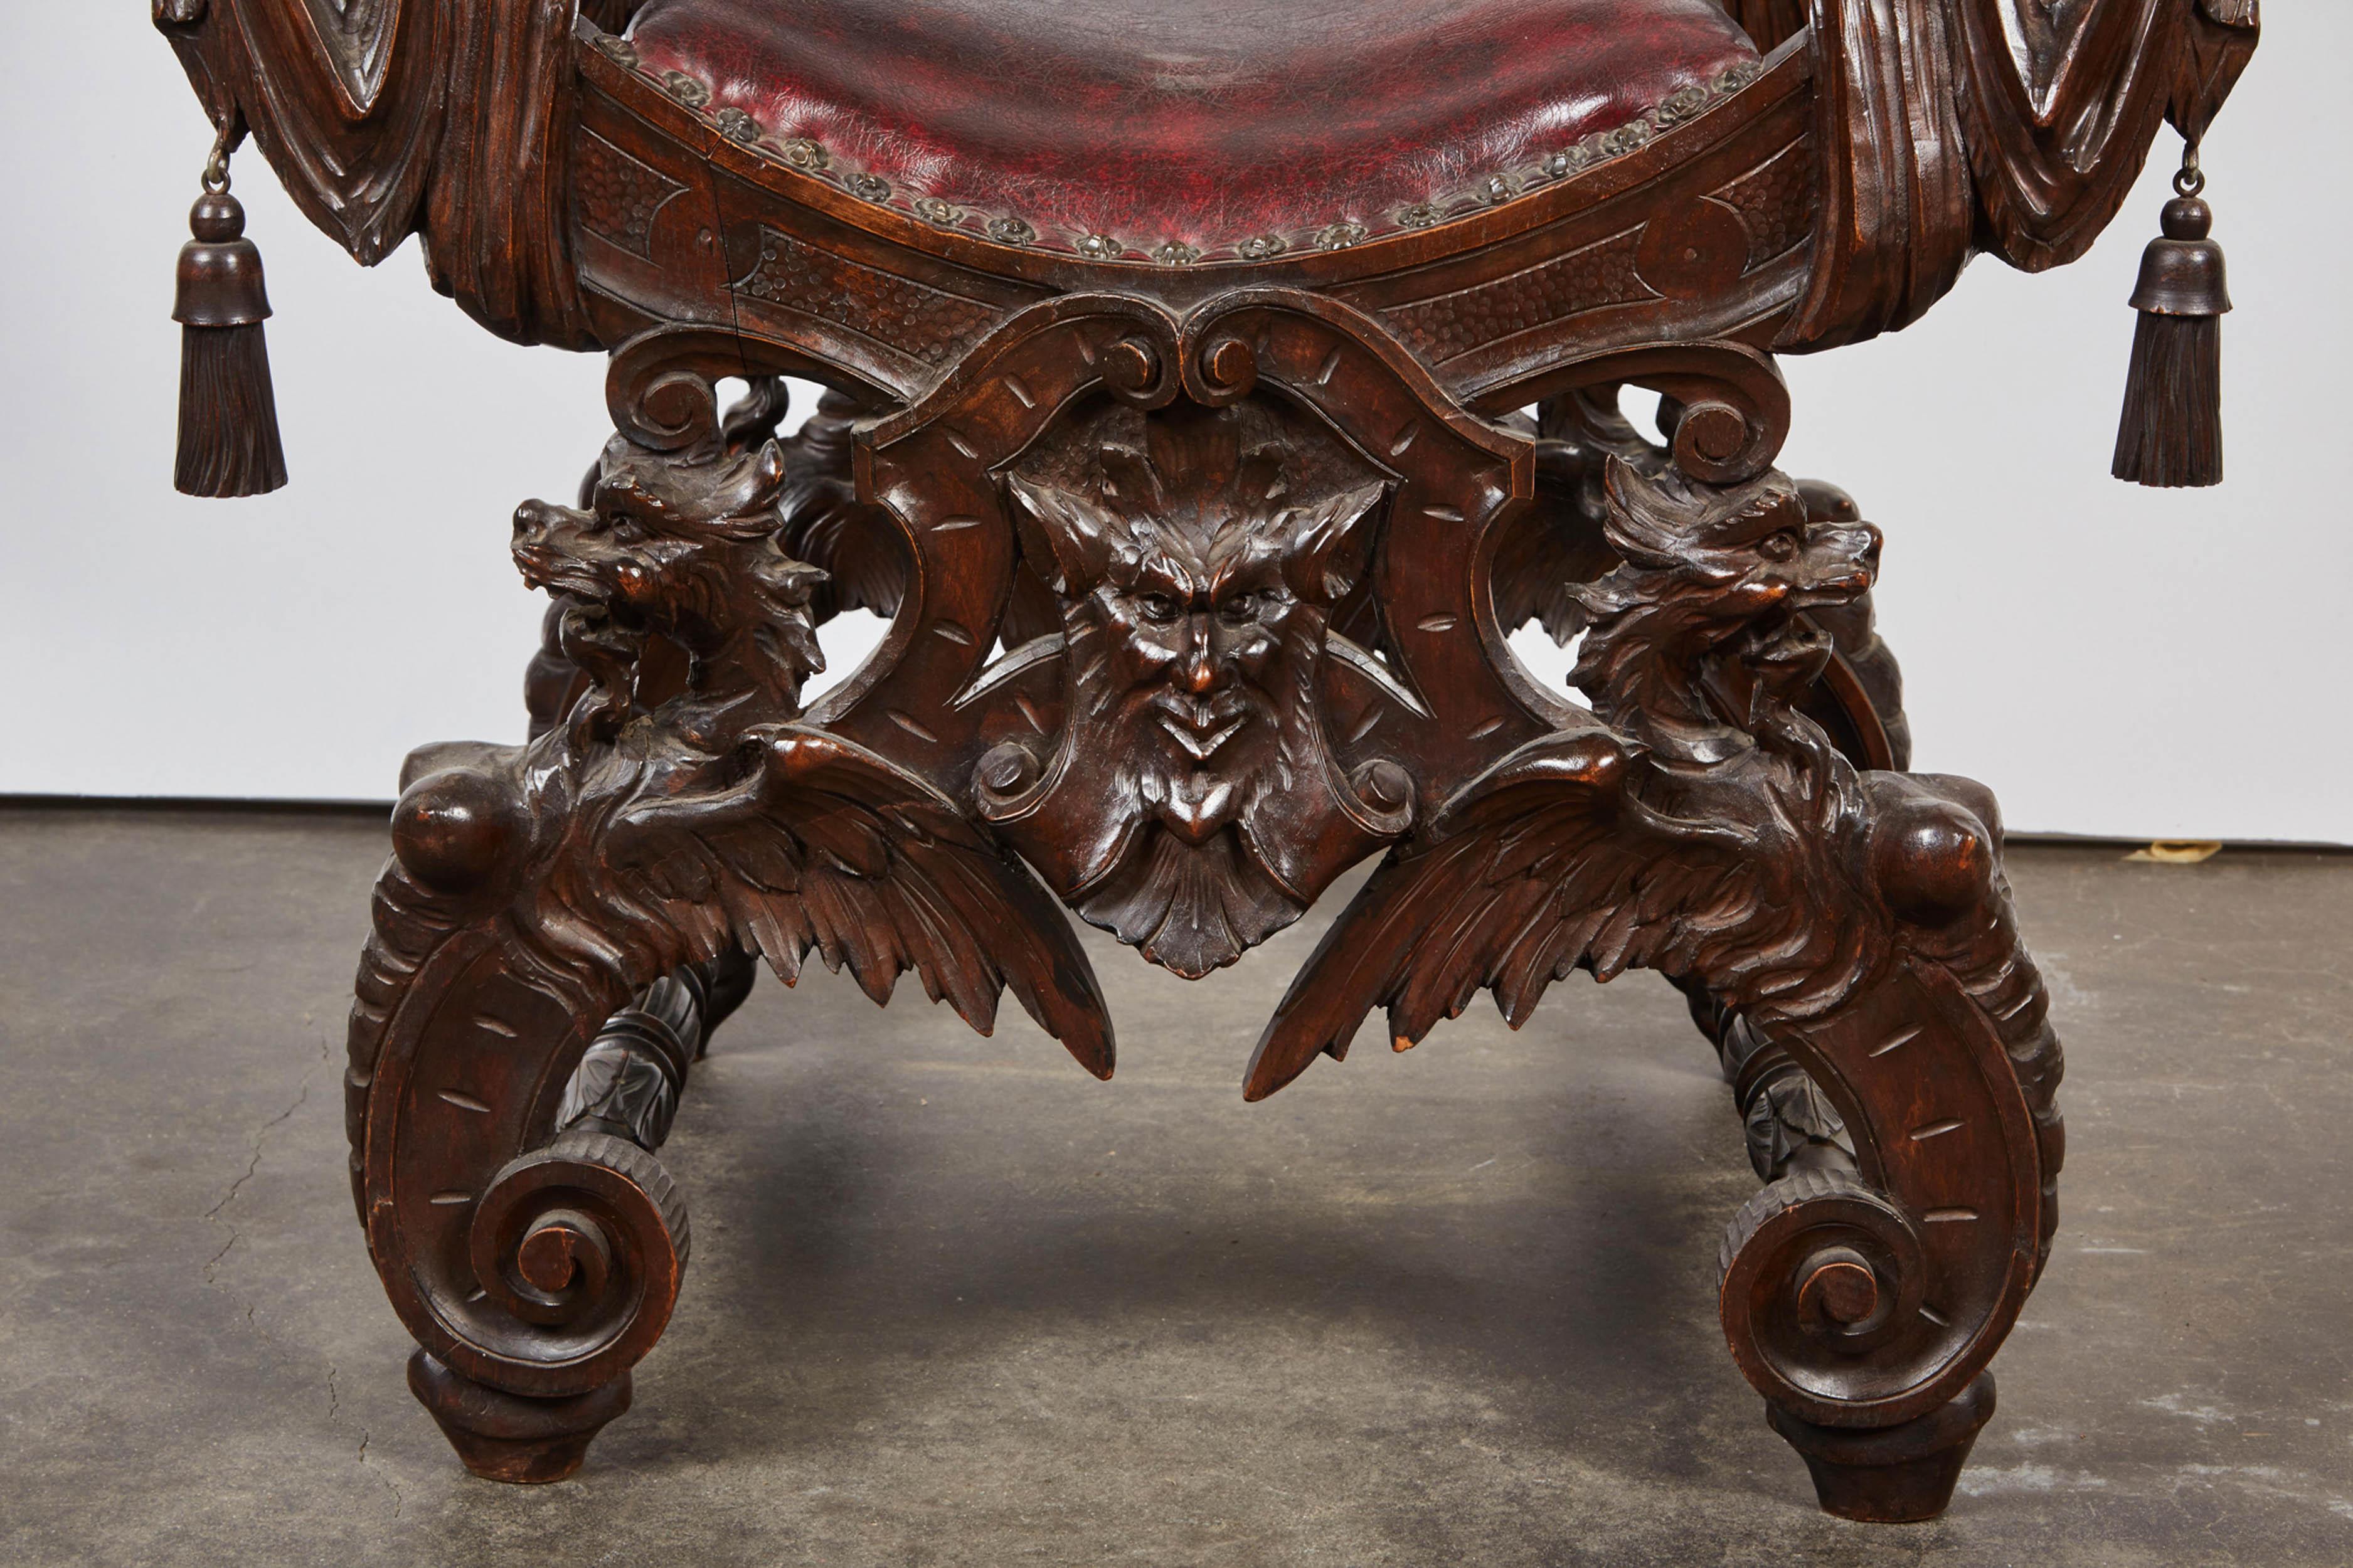 Savonarola chair from The Chicago School, possibly carved by Italian craftsman, chair having a crest with coat of arms above foliate back splat, high relief cherub and falcon carved arm rests, legs featuring a carved dragon, adorned with wooden